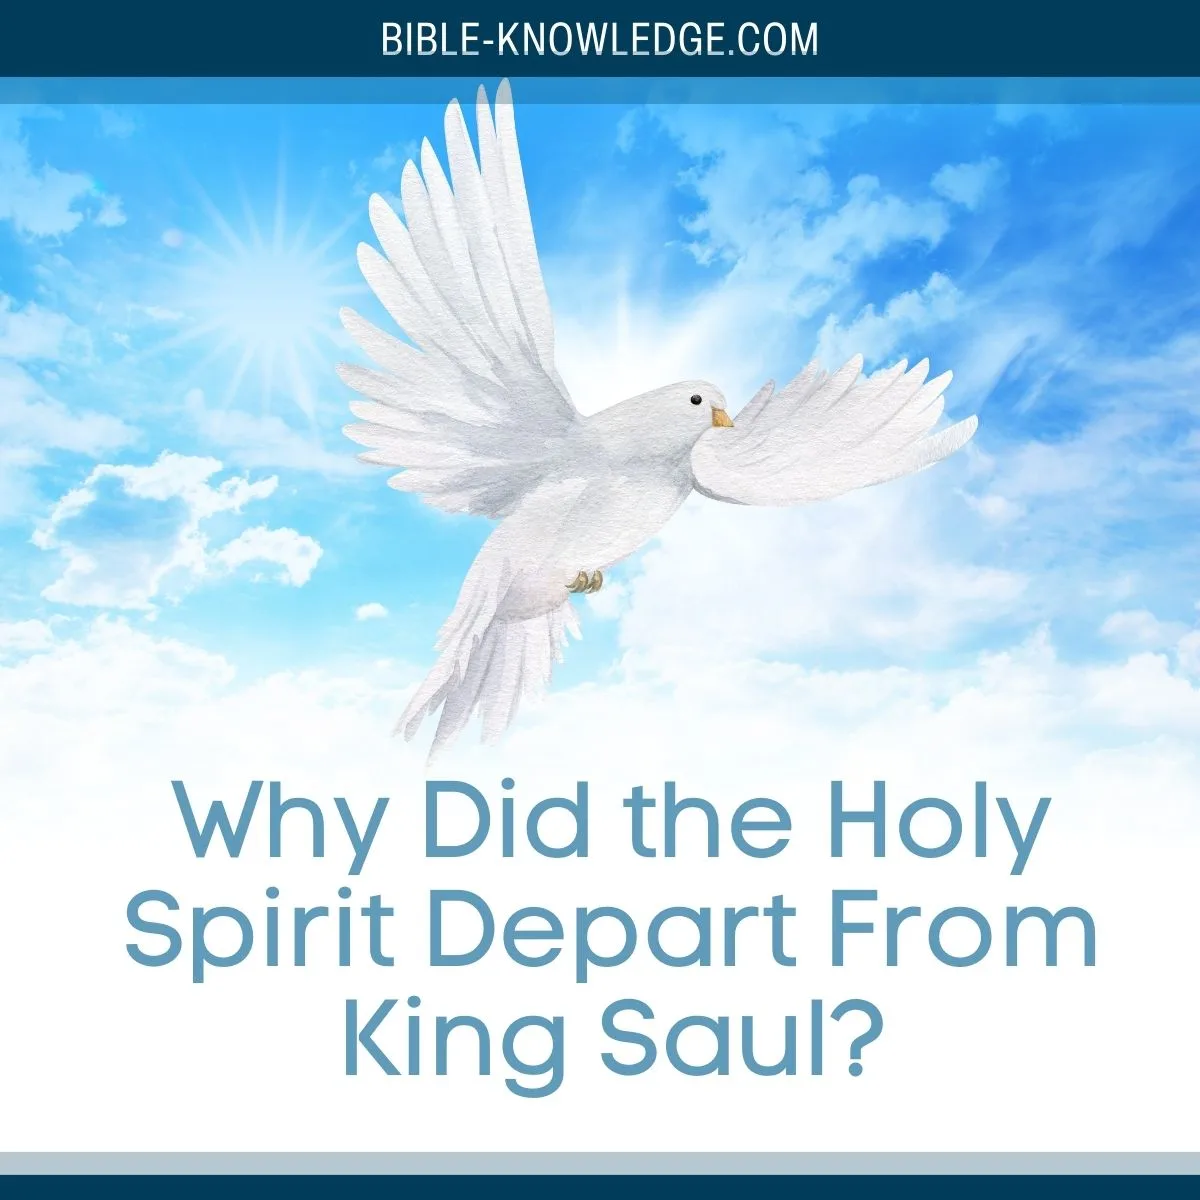 Why Did the Holy Spirit Depart From King Saul?